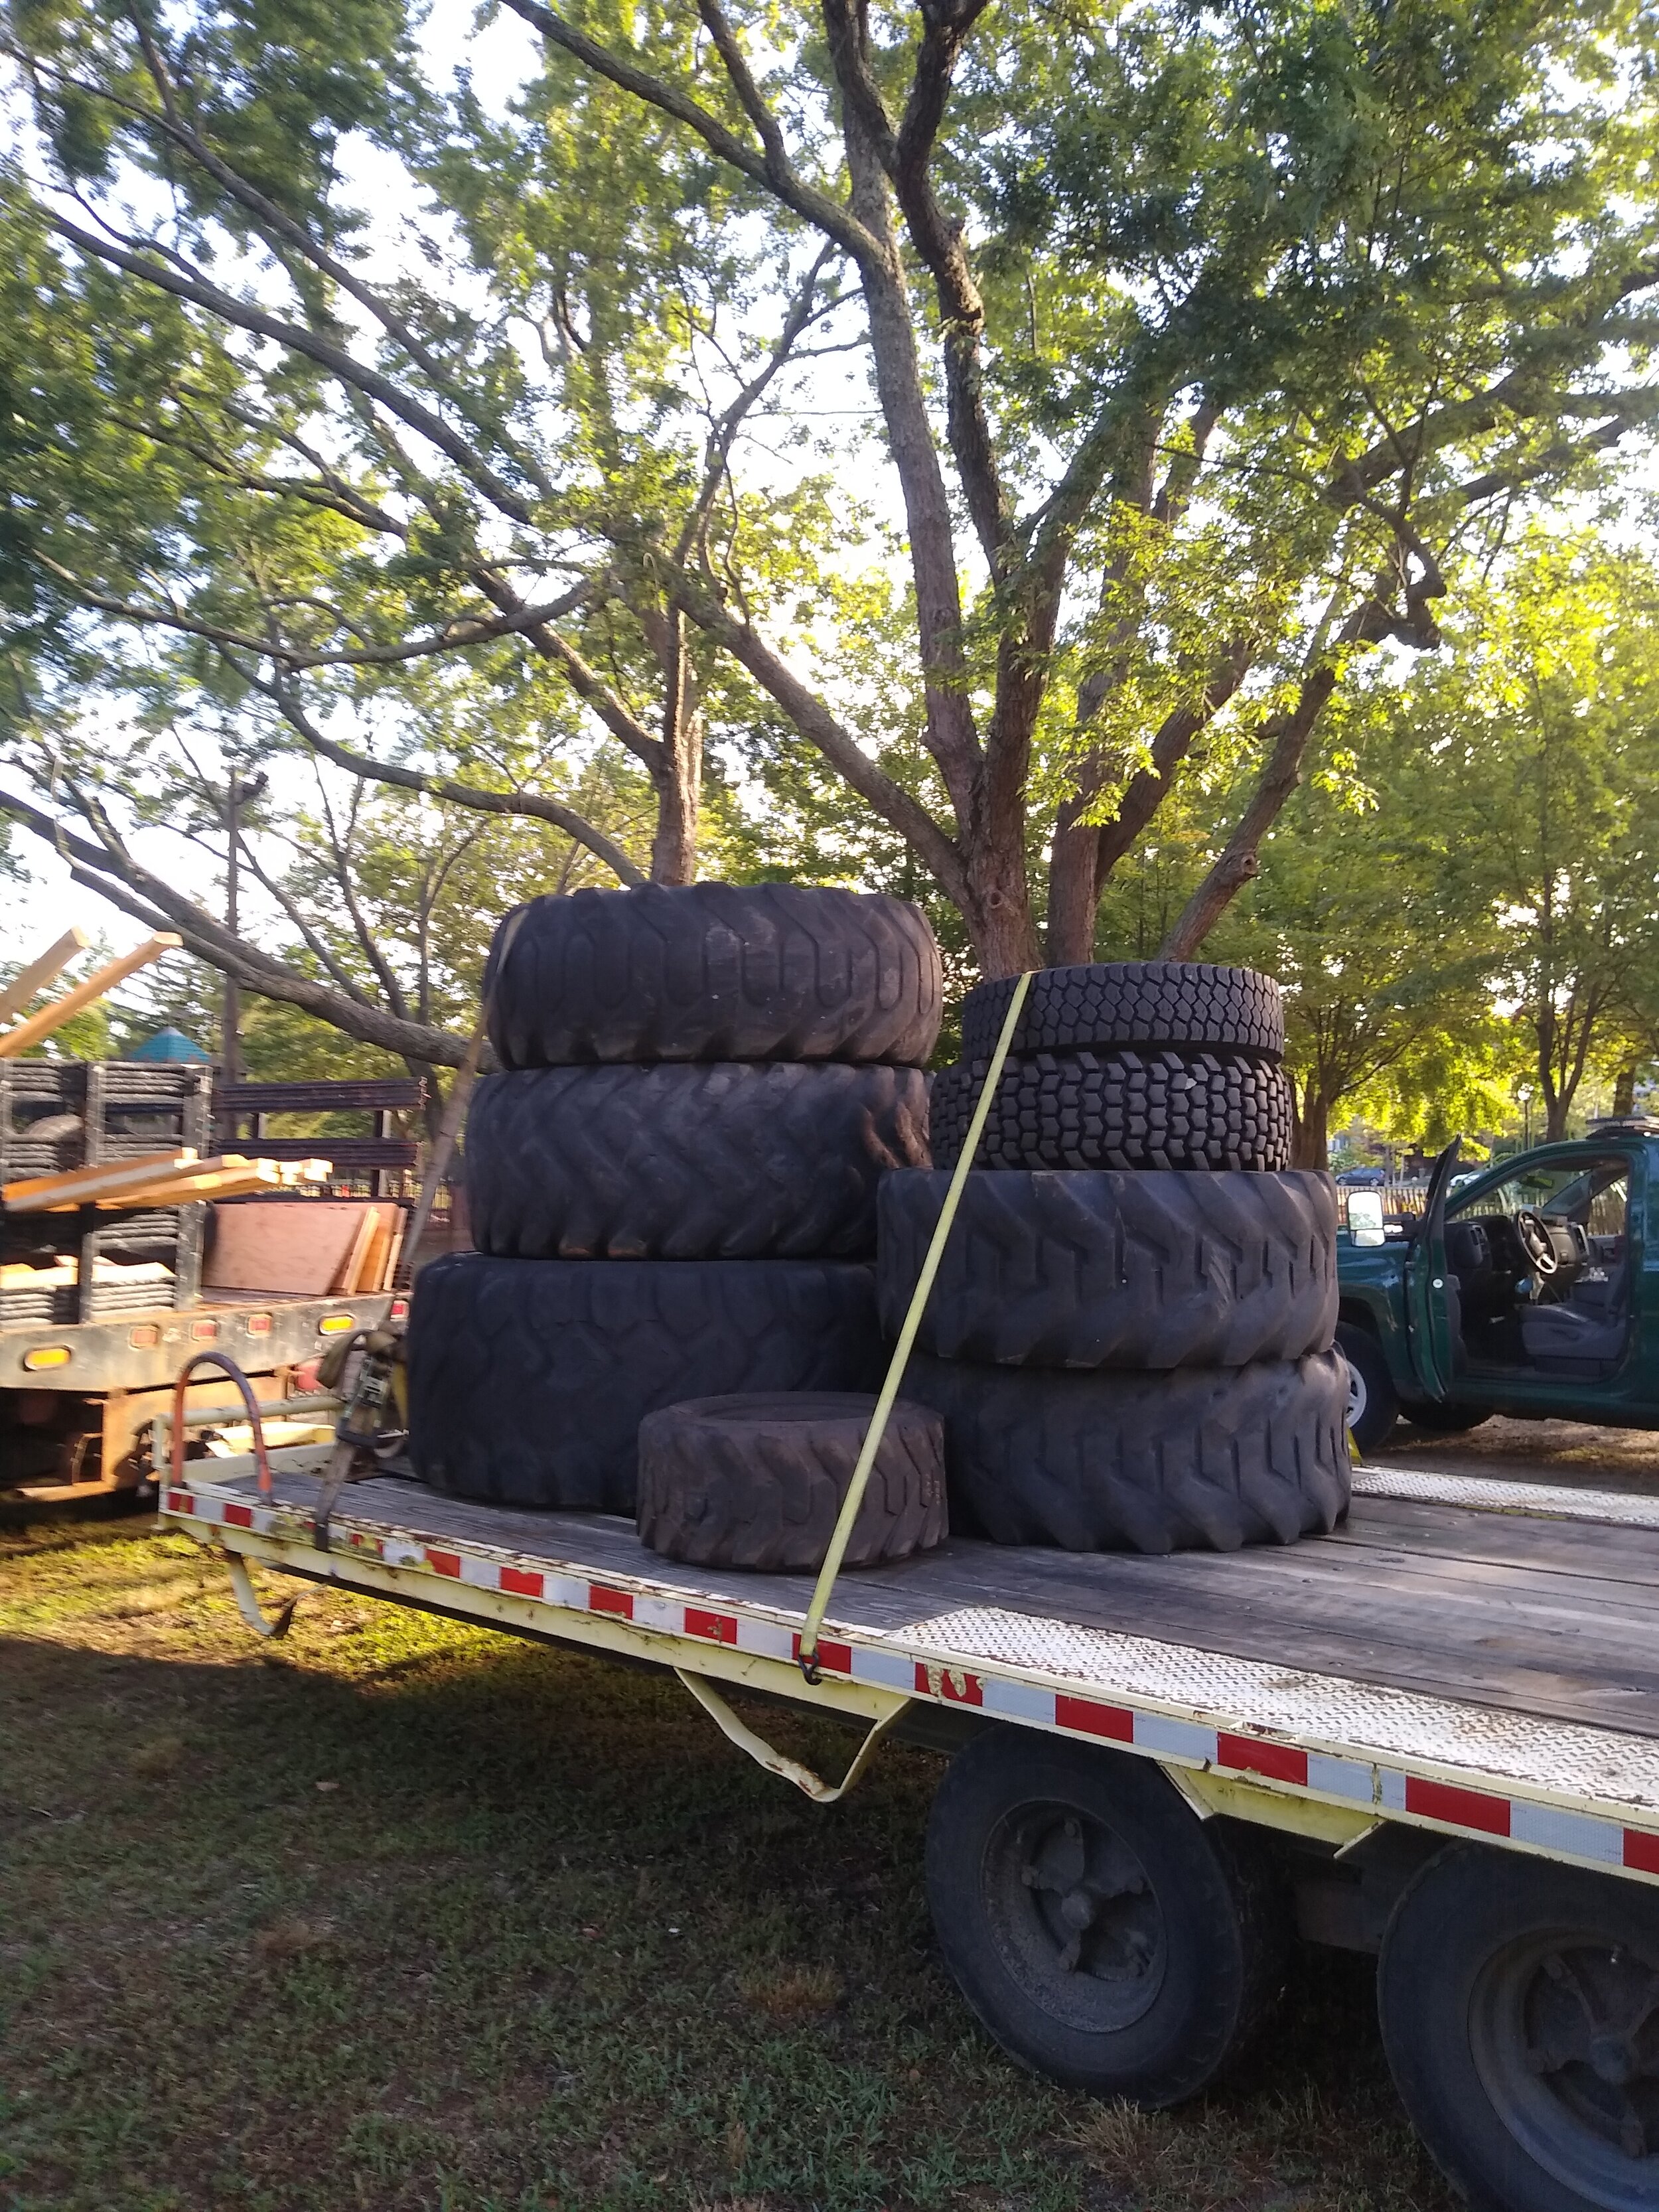  Reuse/recycle! Tires used for Dex’s body arrive by truck in summer 2020 